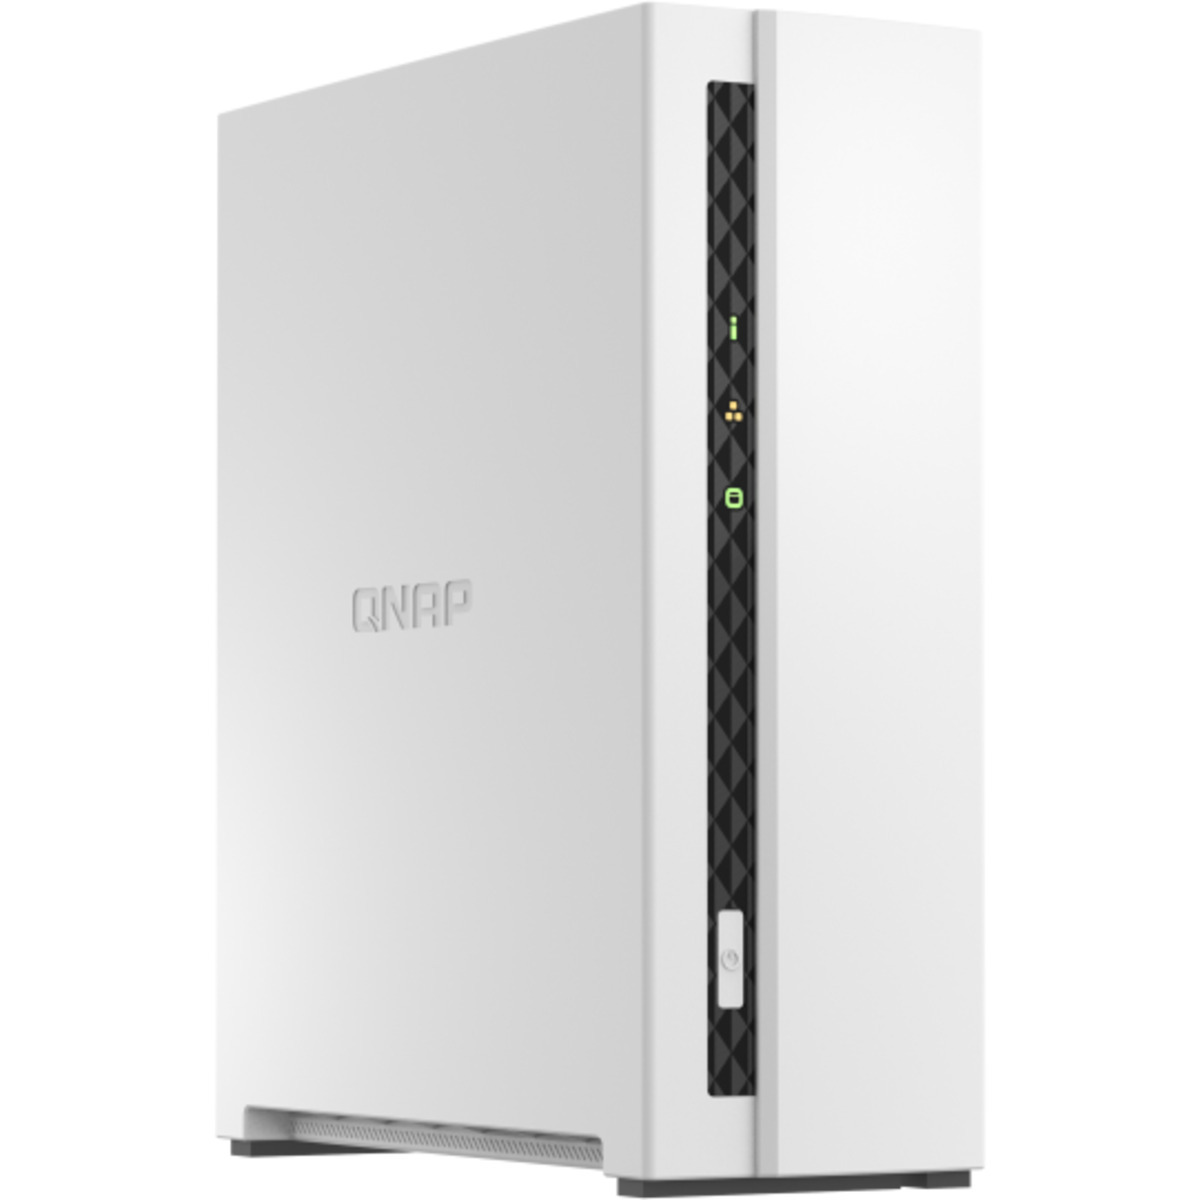 QNAP TS-133 8tb 1-Bay Desktop Personal / Basic Home / Small Office NAS - Network Attached Storage Device 1x8tb Western Digital Red Pro WD8003FFBX 3.5 7200rpm SATA 6Gb/s HDD NAS Class Drives Installed - Burn-In Tested TS-133